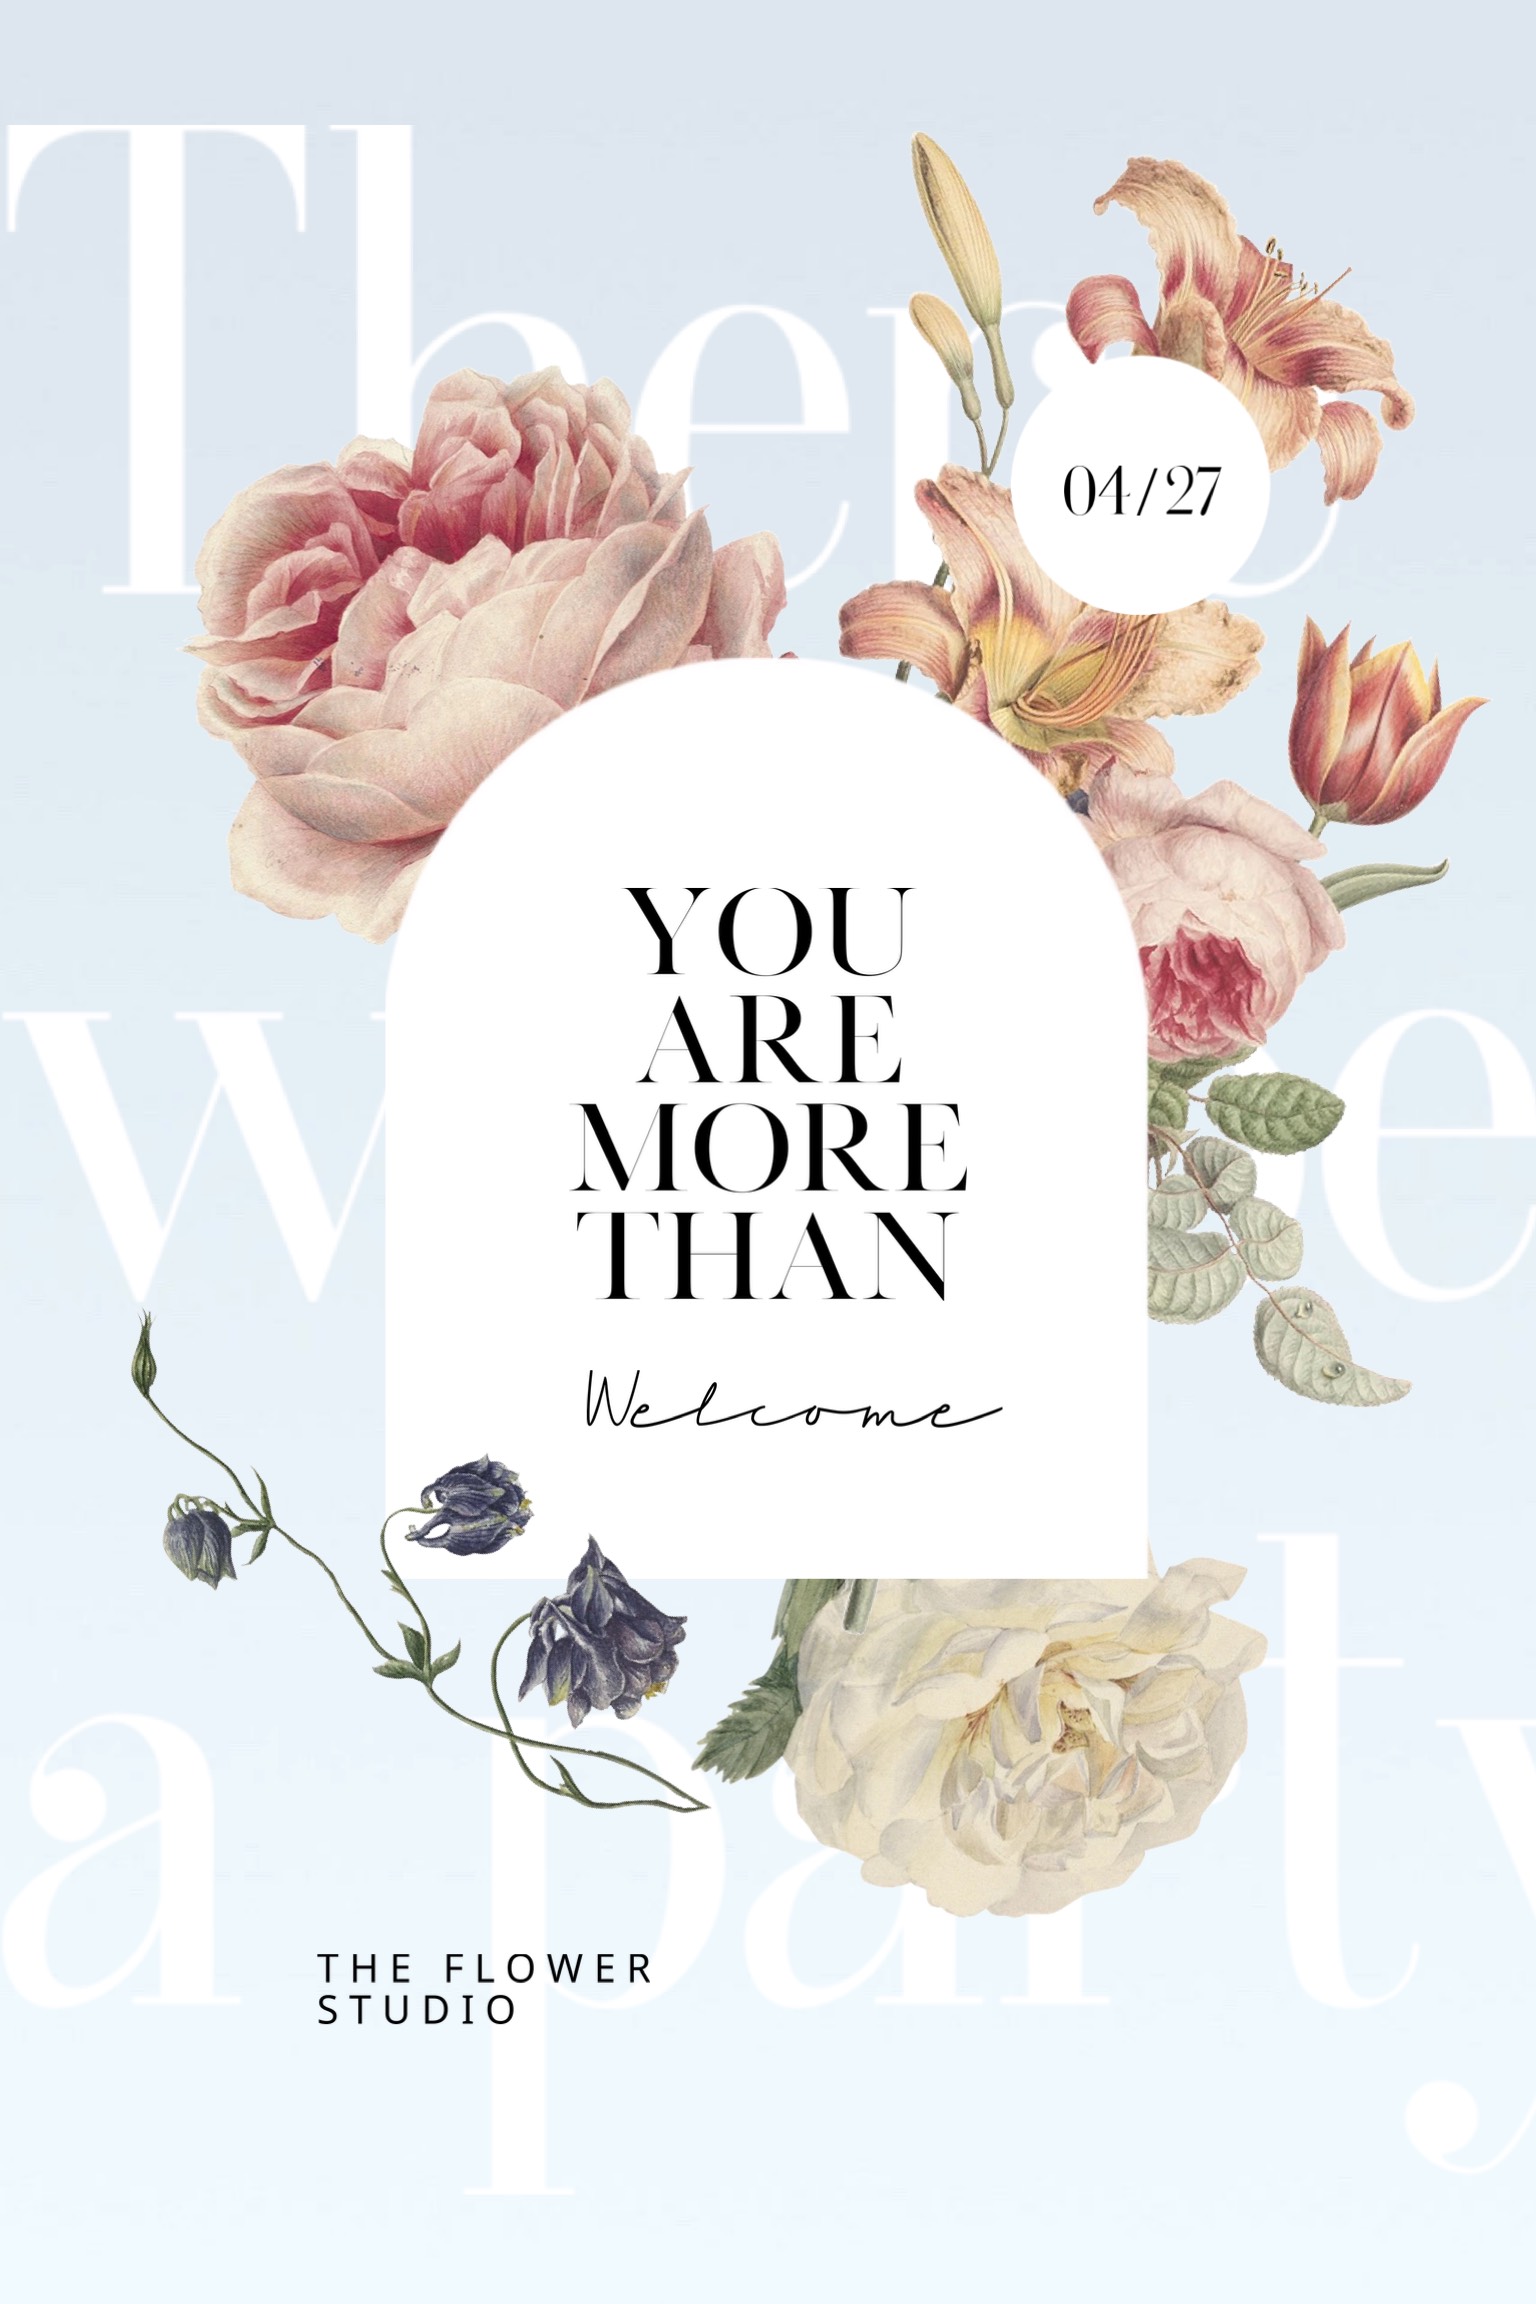 A Picture Of Flowers With The Words You Are More Than Invitation Template